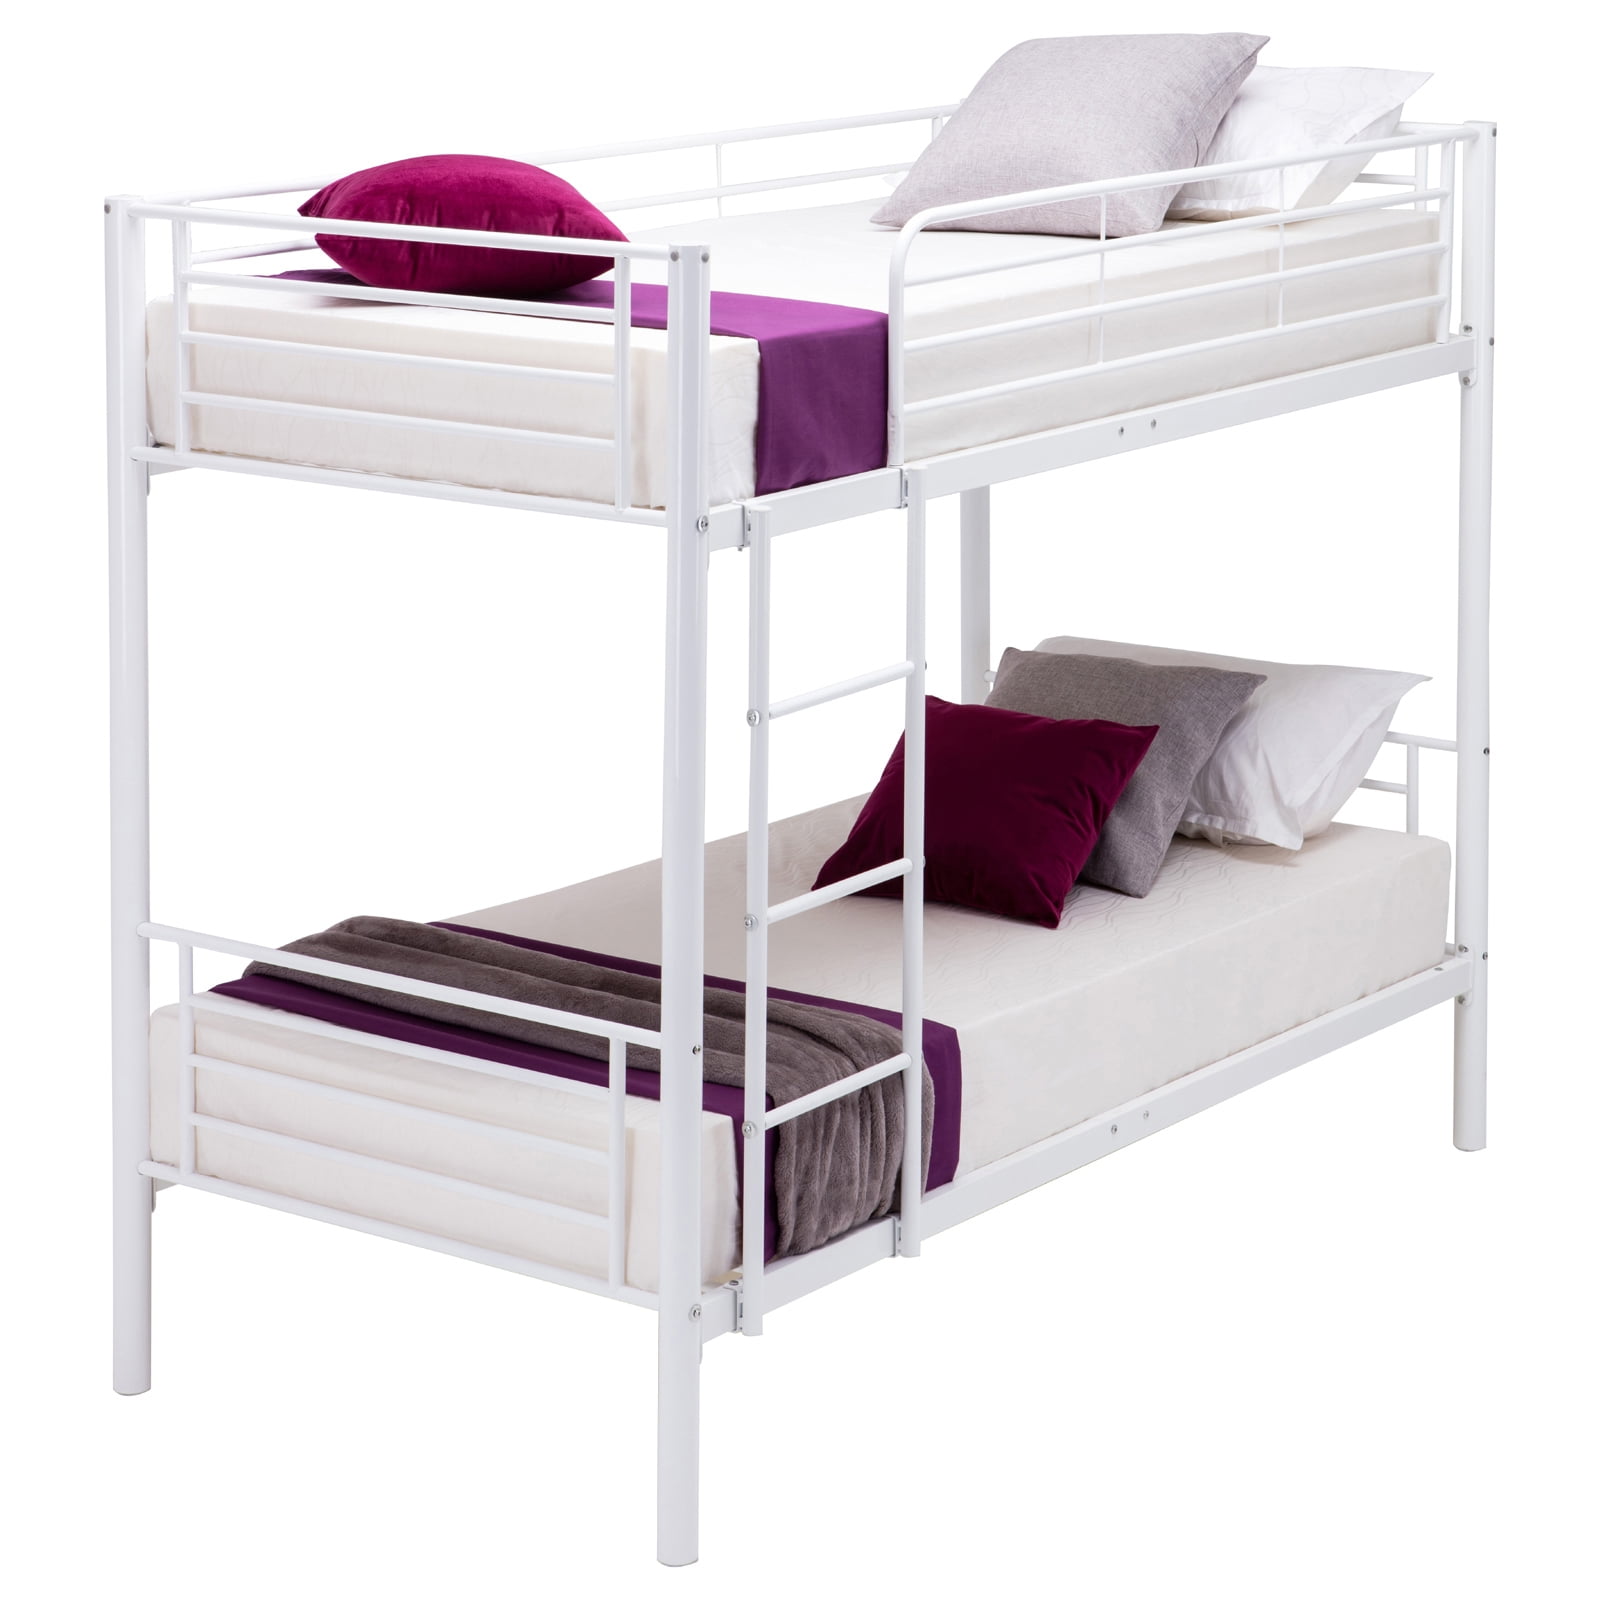 Mecor Twin Over Metal Bunk Beds, Black Friday Deals On Bunk Beds Uk